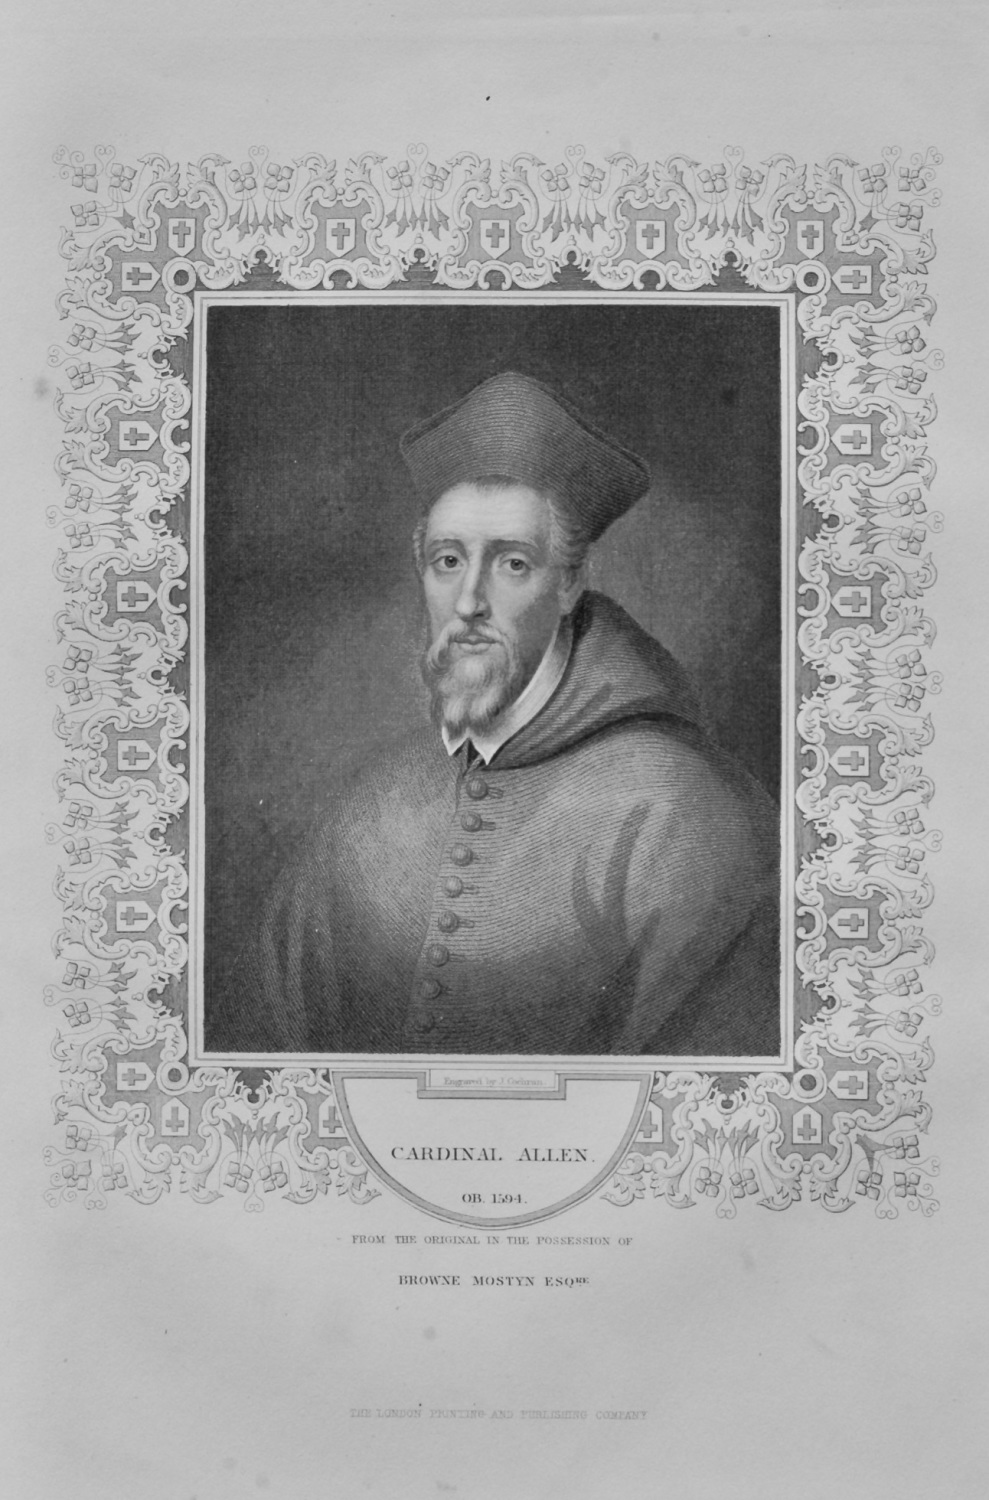 Cardinal Allen. OB. 1595.  from the original in the possession of Browne Mo